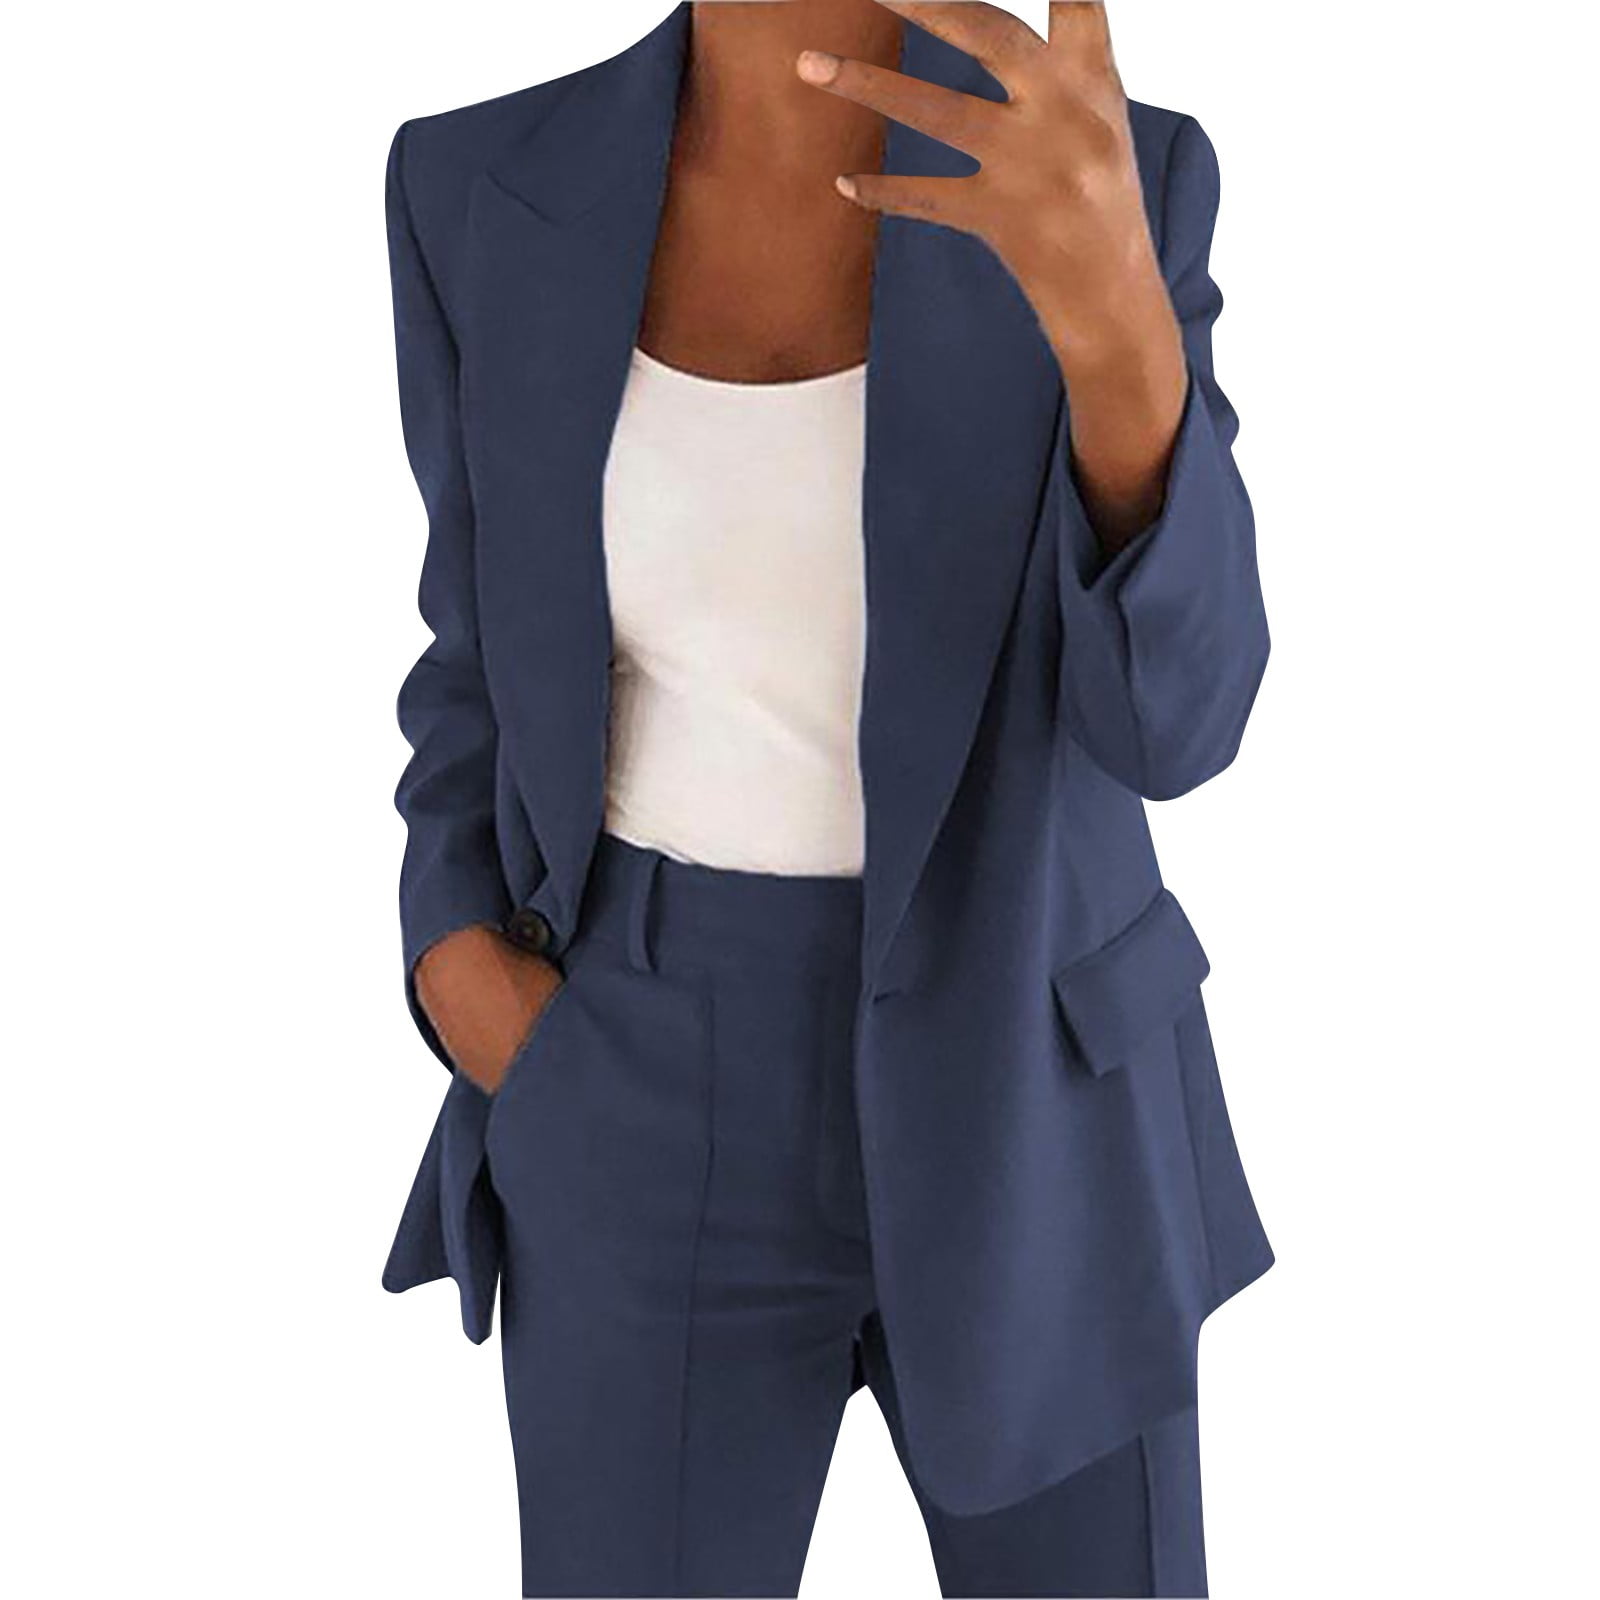 Navy Blue Business Suit Set For Women Blazer, Skirt, And Dress Jackets For  Women Office And Work Wear Uniforms From Zhajitui, $50.46 | DHgate.Com